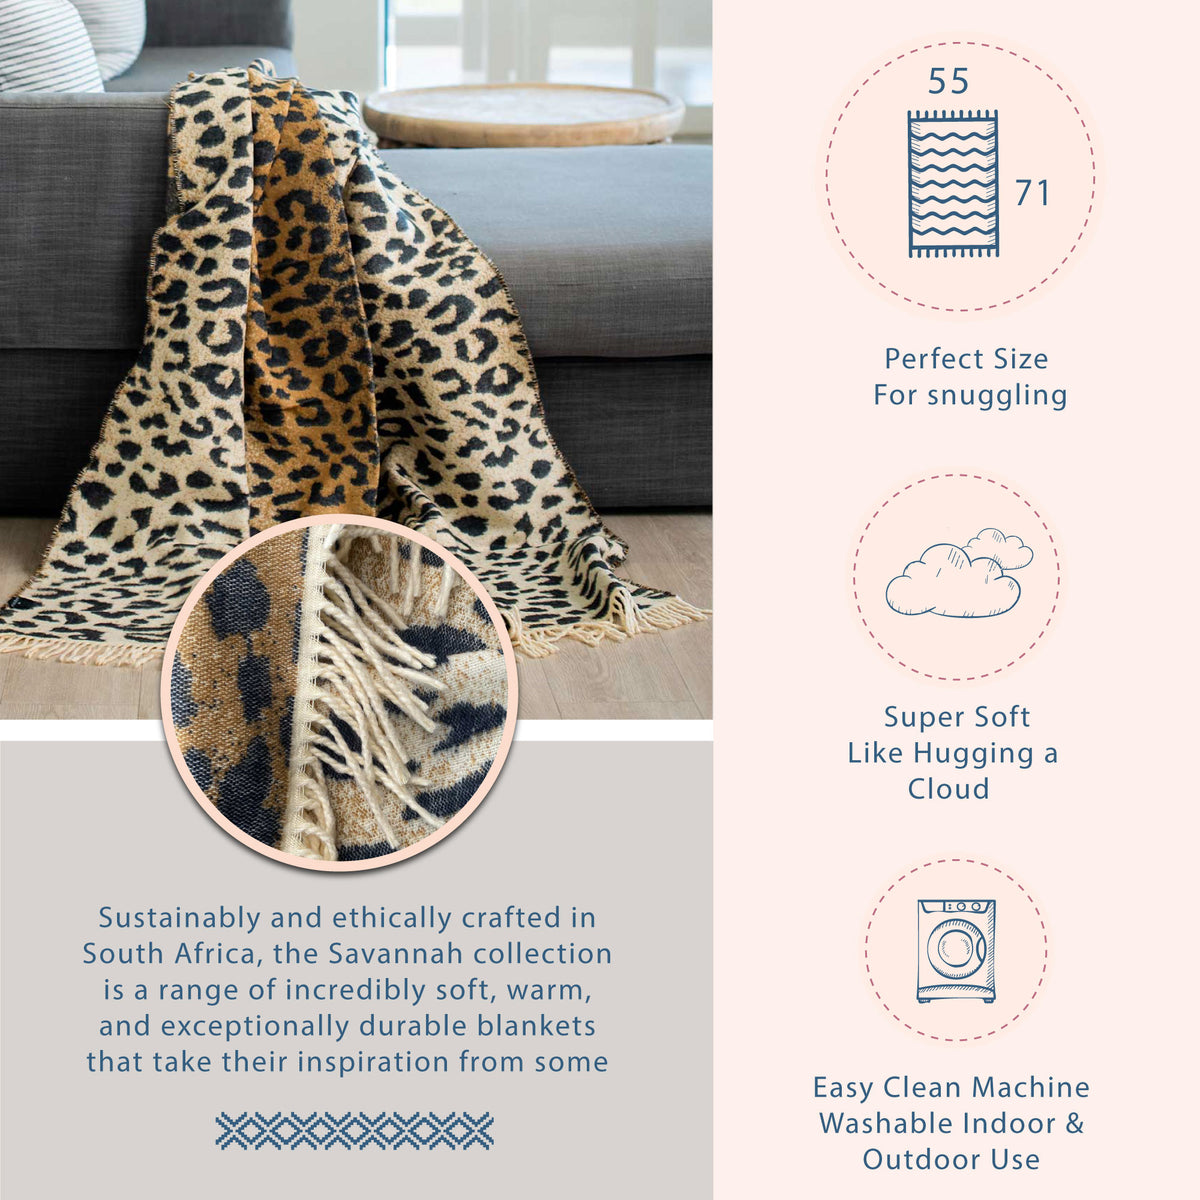 Thula Tula Blanket callouts for the African Leopard Print Throw and Blanket shows sizing and close up of each African blanket